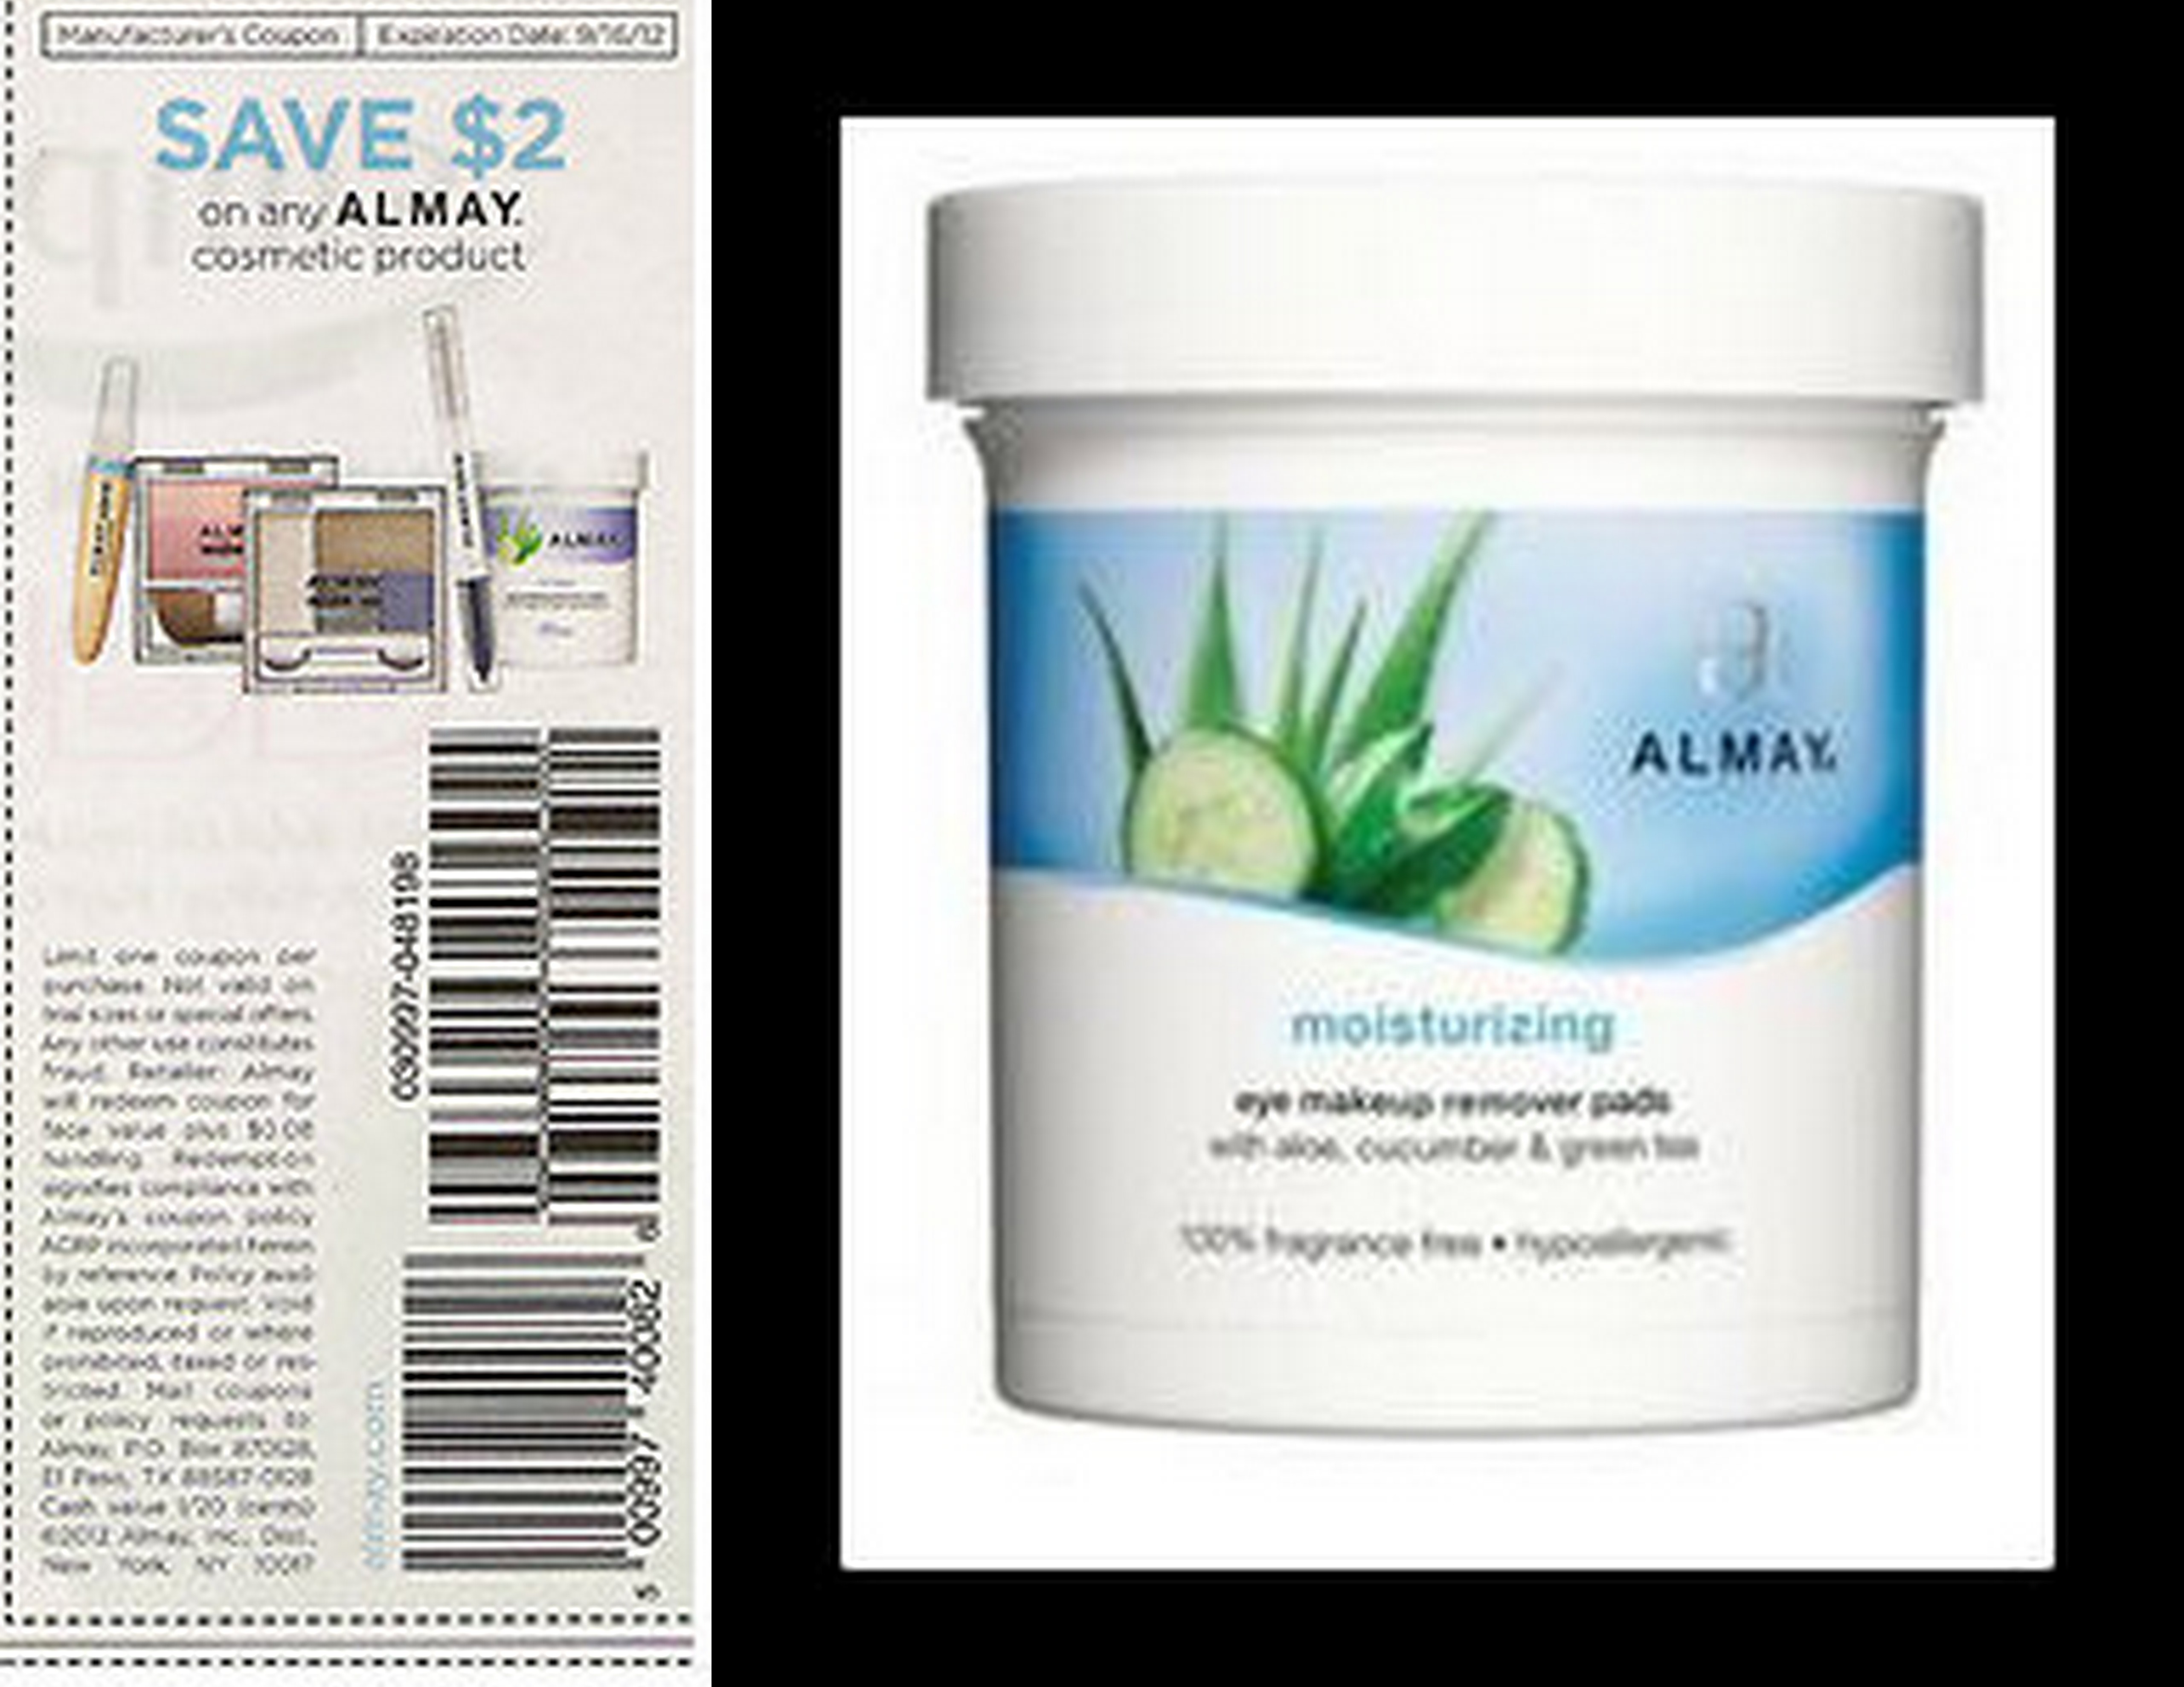 New $2 Almay Coupon = FREE Cosmetic Remover Pads at Walmart